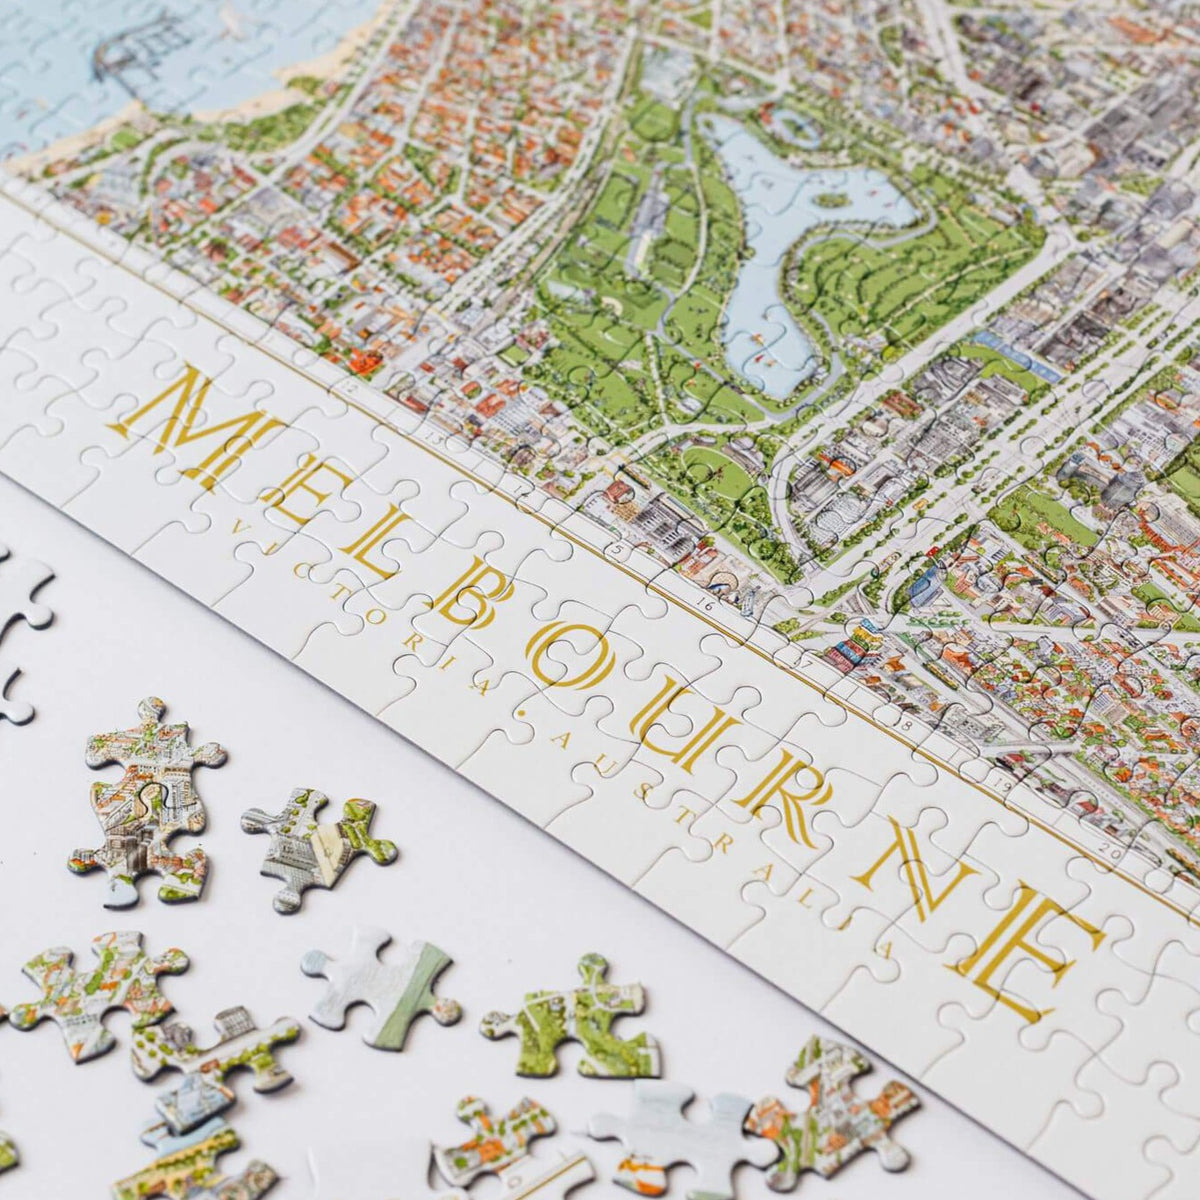 The Melbourne Map 1,000-piece jigsaw puzzle on a white board. The image shows the completed puzzle on a diagonal and some loose piece next to it.